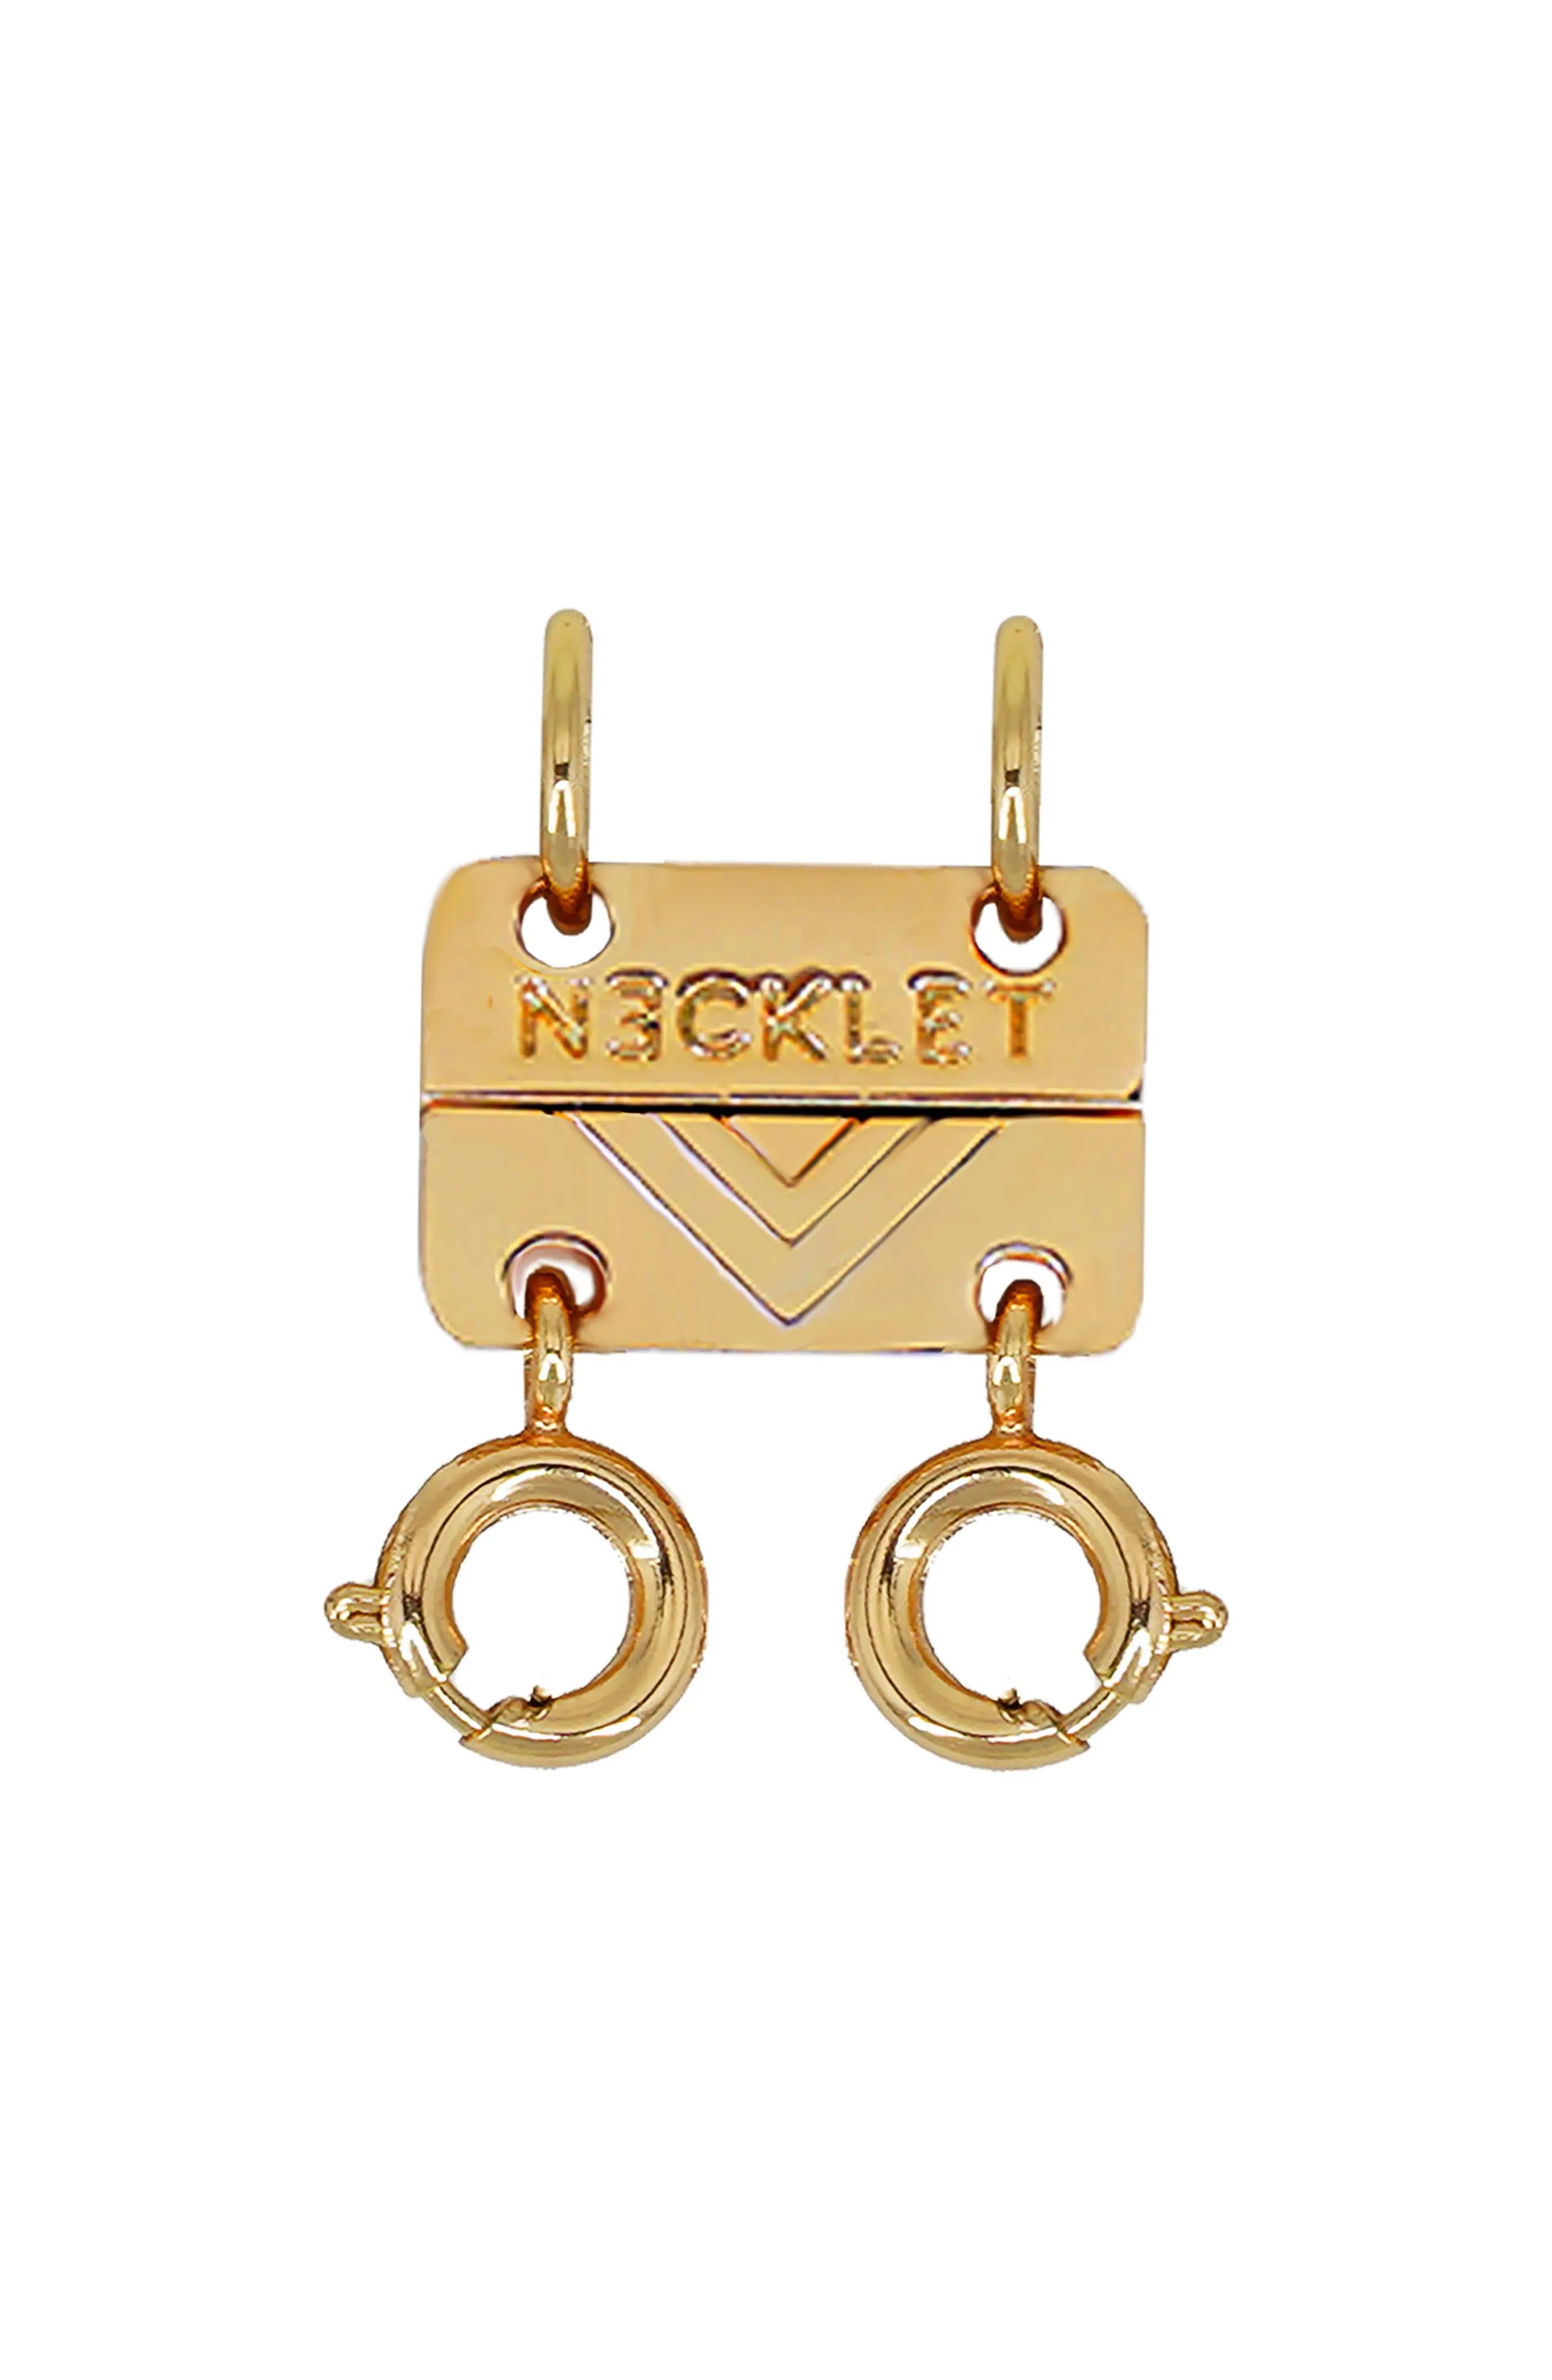 Necklet Double Layering Clasp in Gold at Nordstrom | Nordstrom